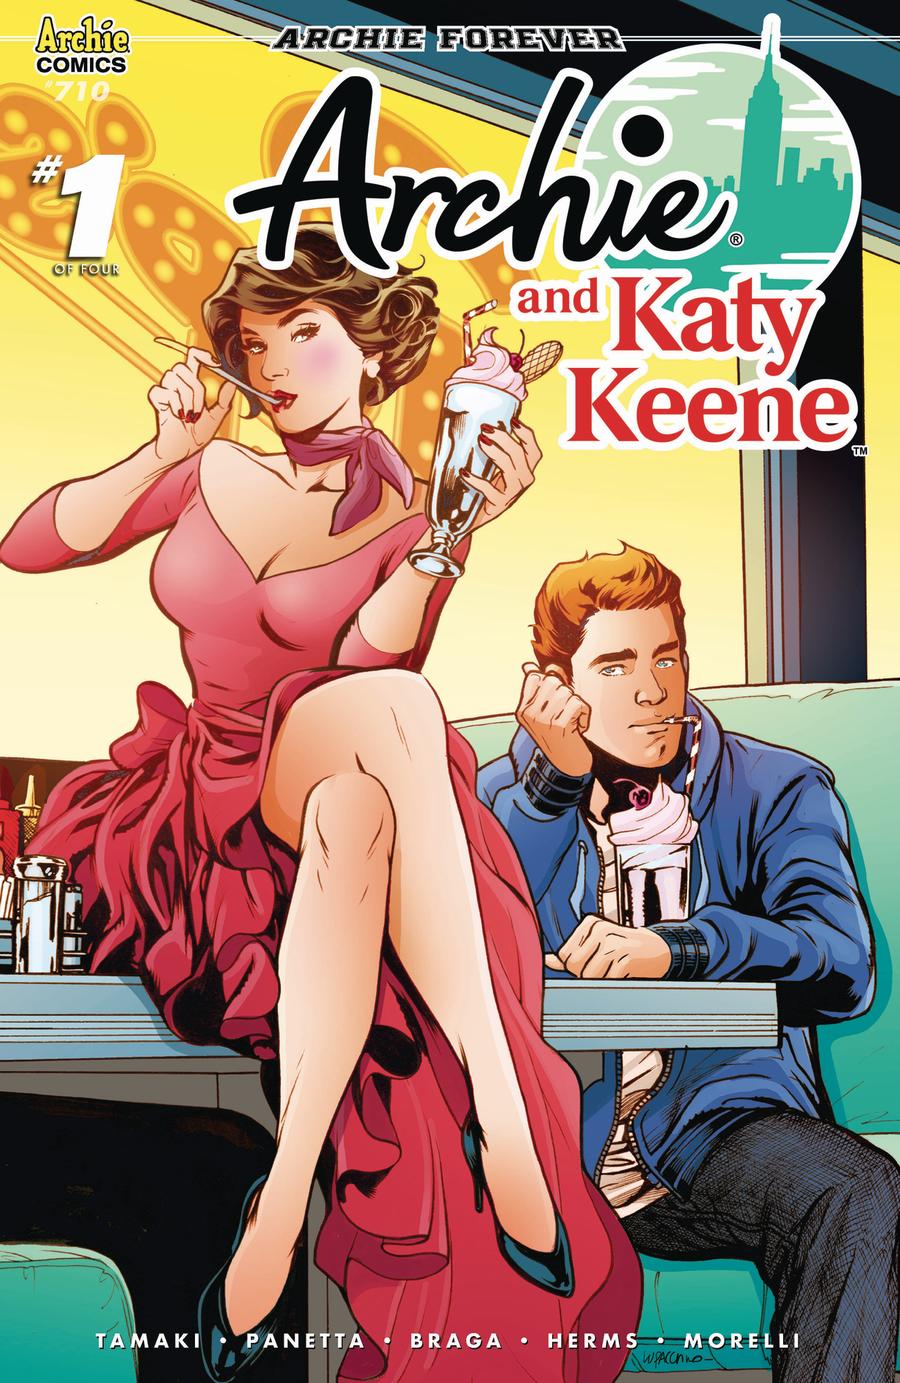 Archie Vol 2 #710 Archie And Katy Keene Part 1 Cover C Variant Emanuela Lupacchino & Lee Laughridge Cover